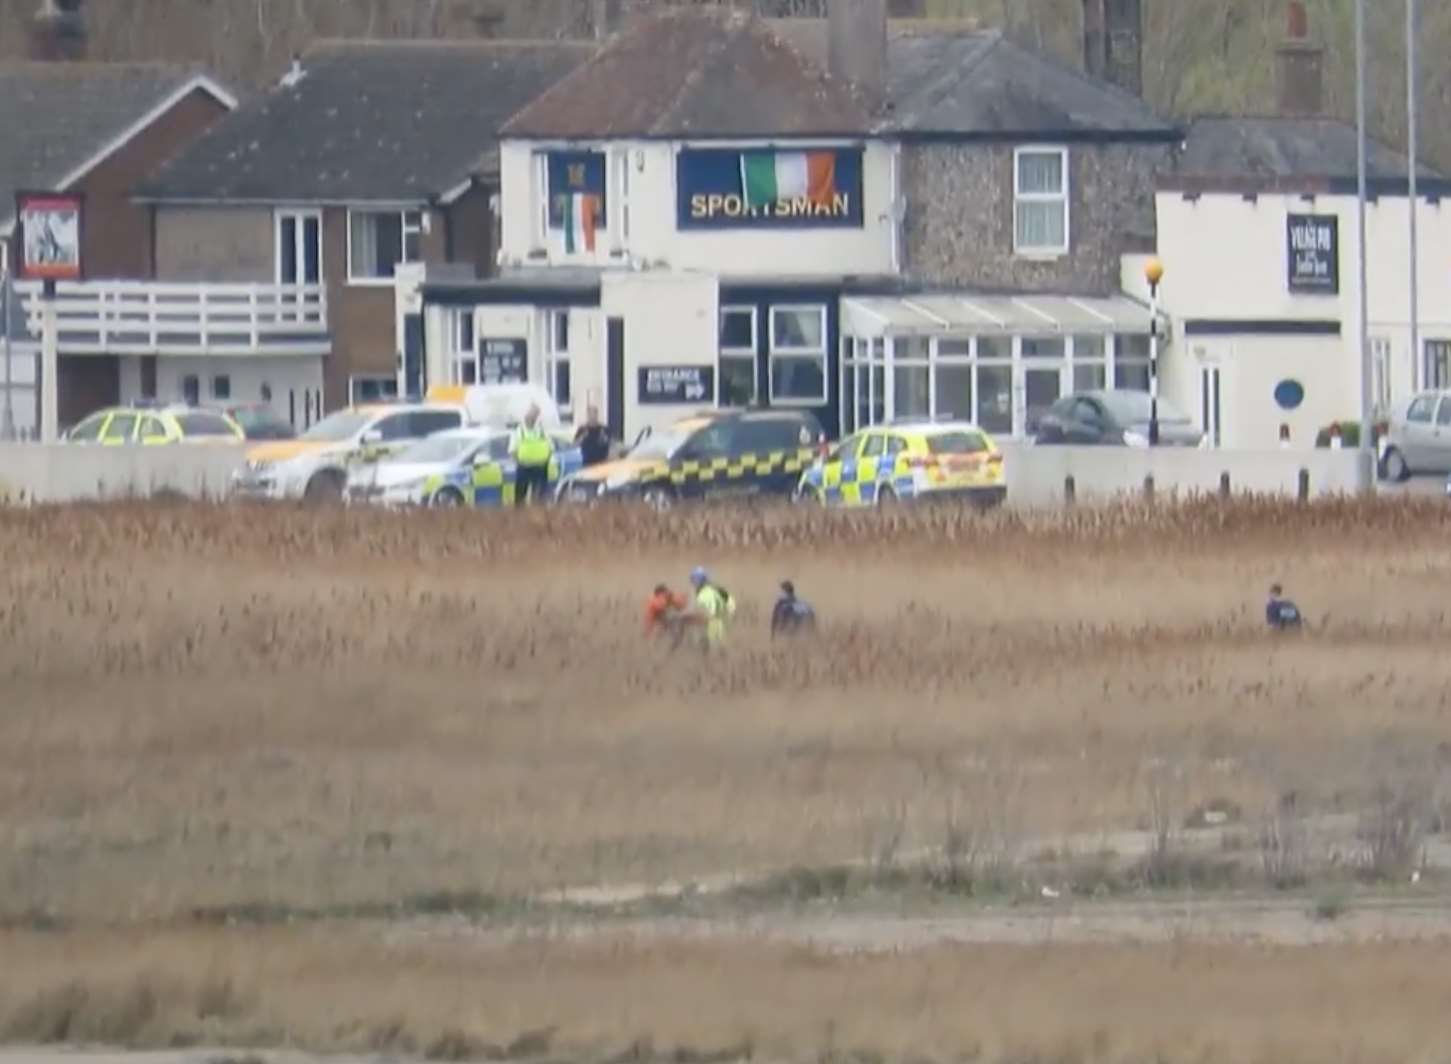 The man was found in the reed bed